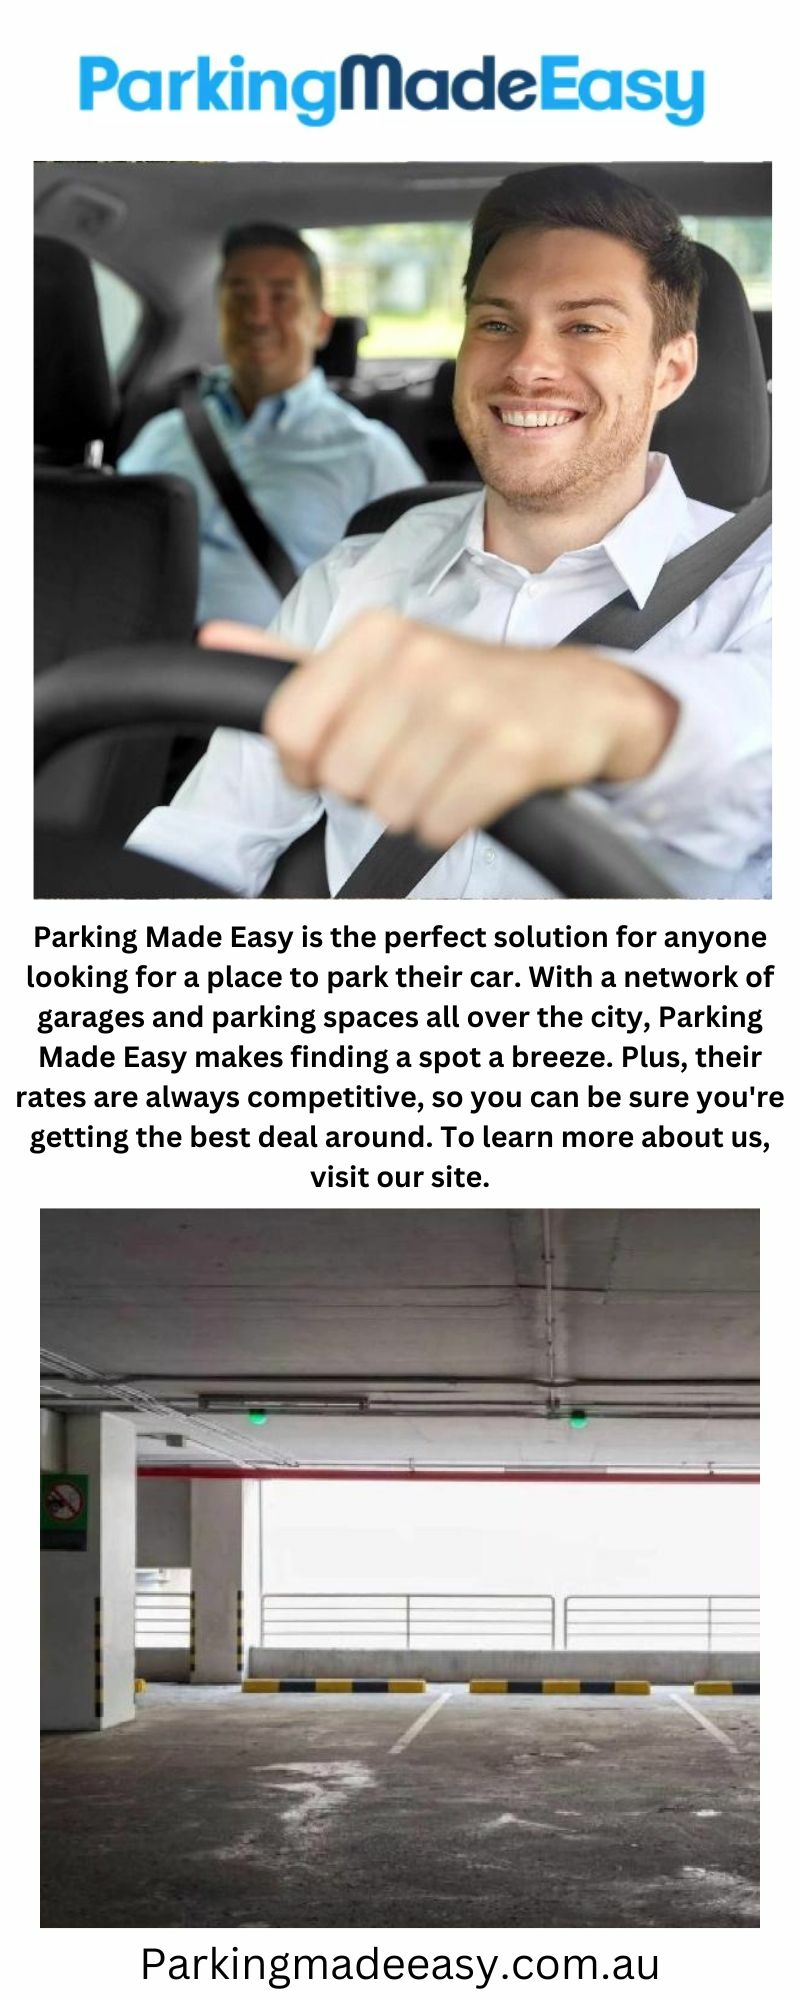 Parkingmadeeasy1 on Gab: 'Searching For The Best Place For Your Car Parking…' - Gab Social